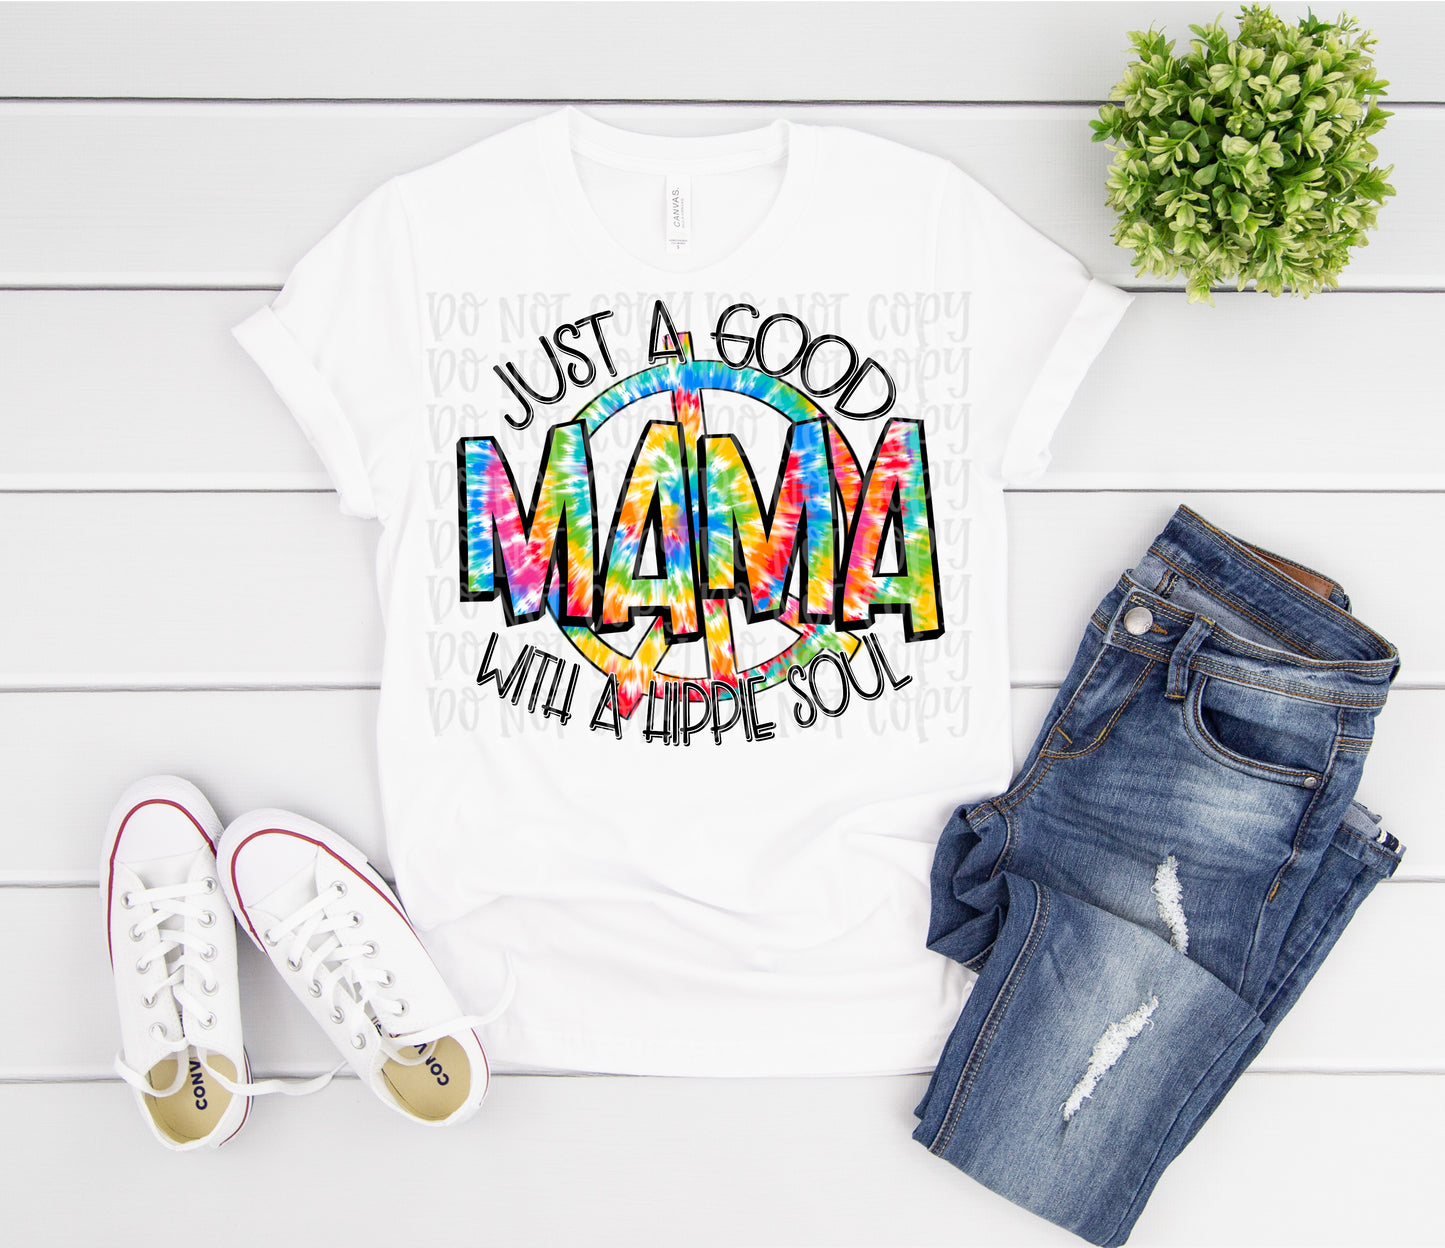 Just a Good Mama -Hippie Soul 1